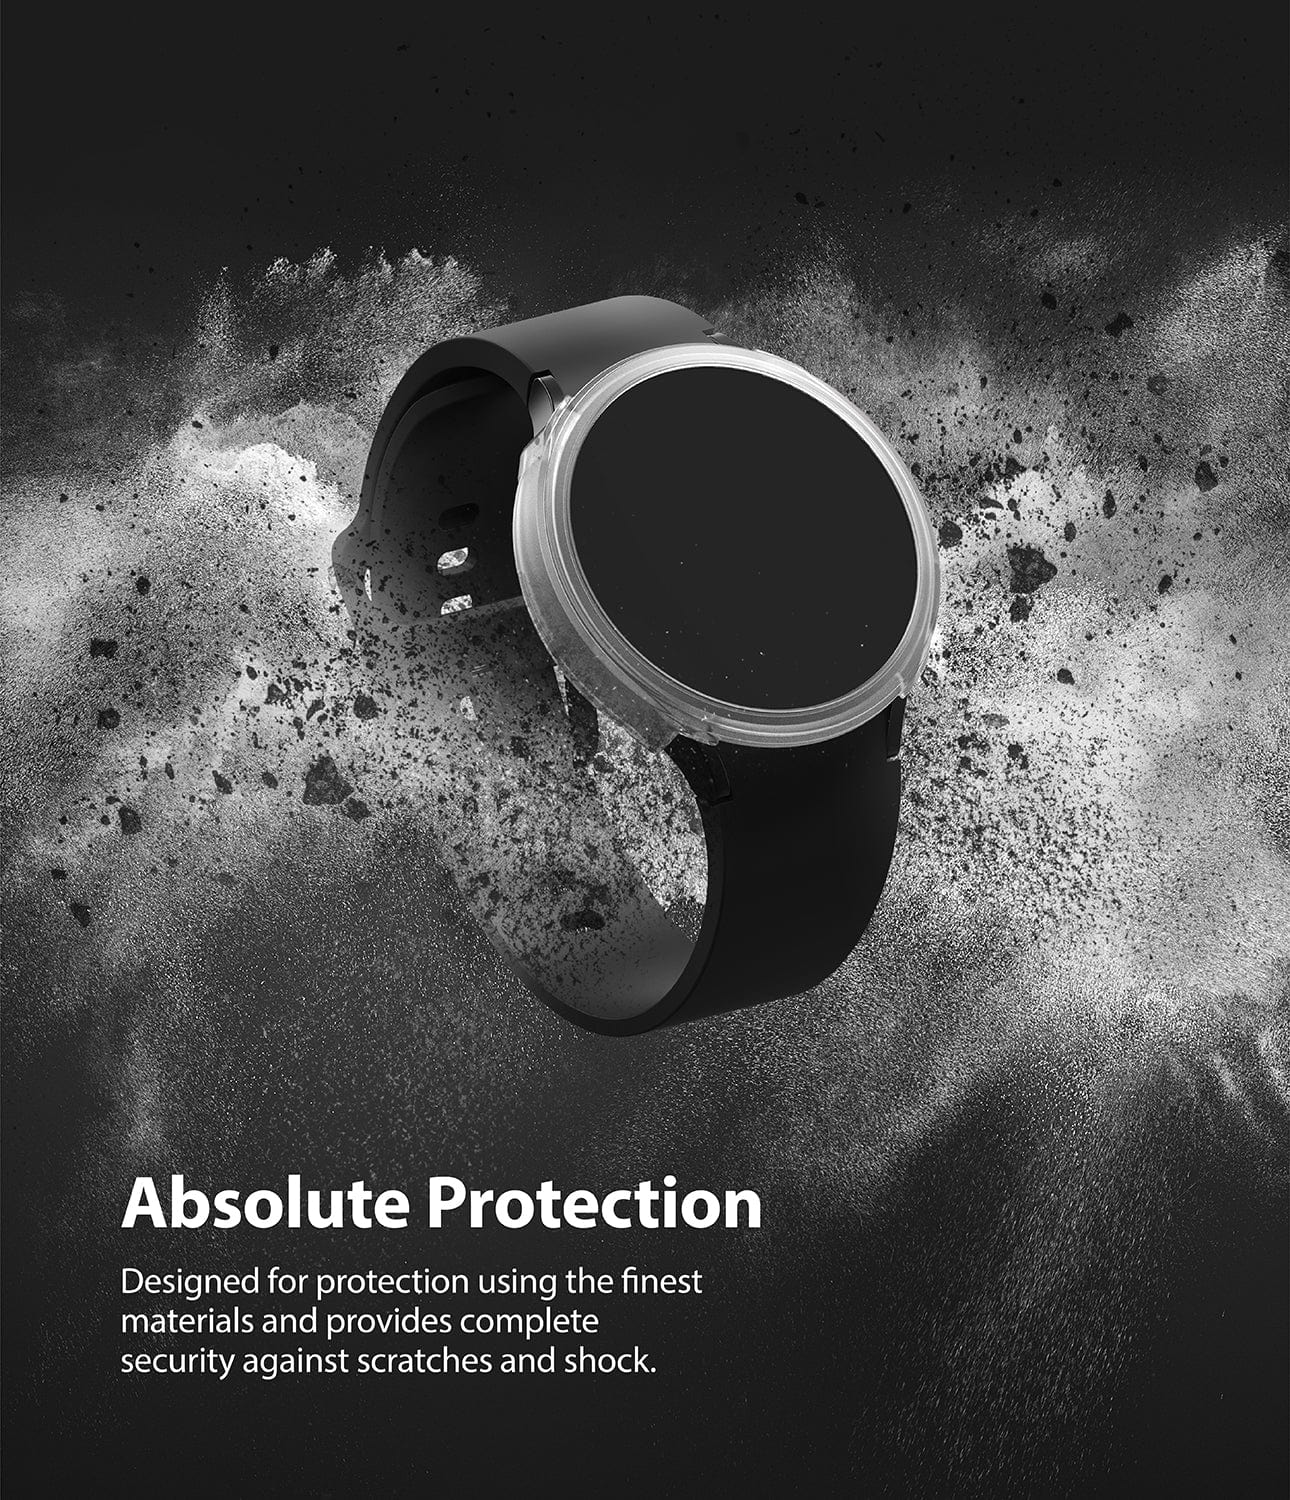 Offering absolute protection, this screen protector is crafted from the finest materials and provides complete security against scratches and shocks.